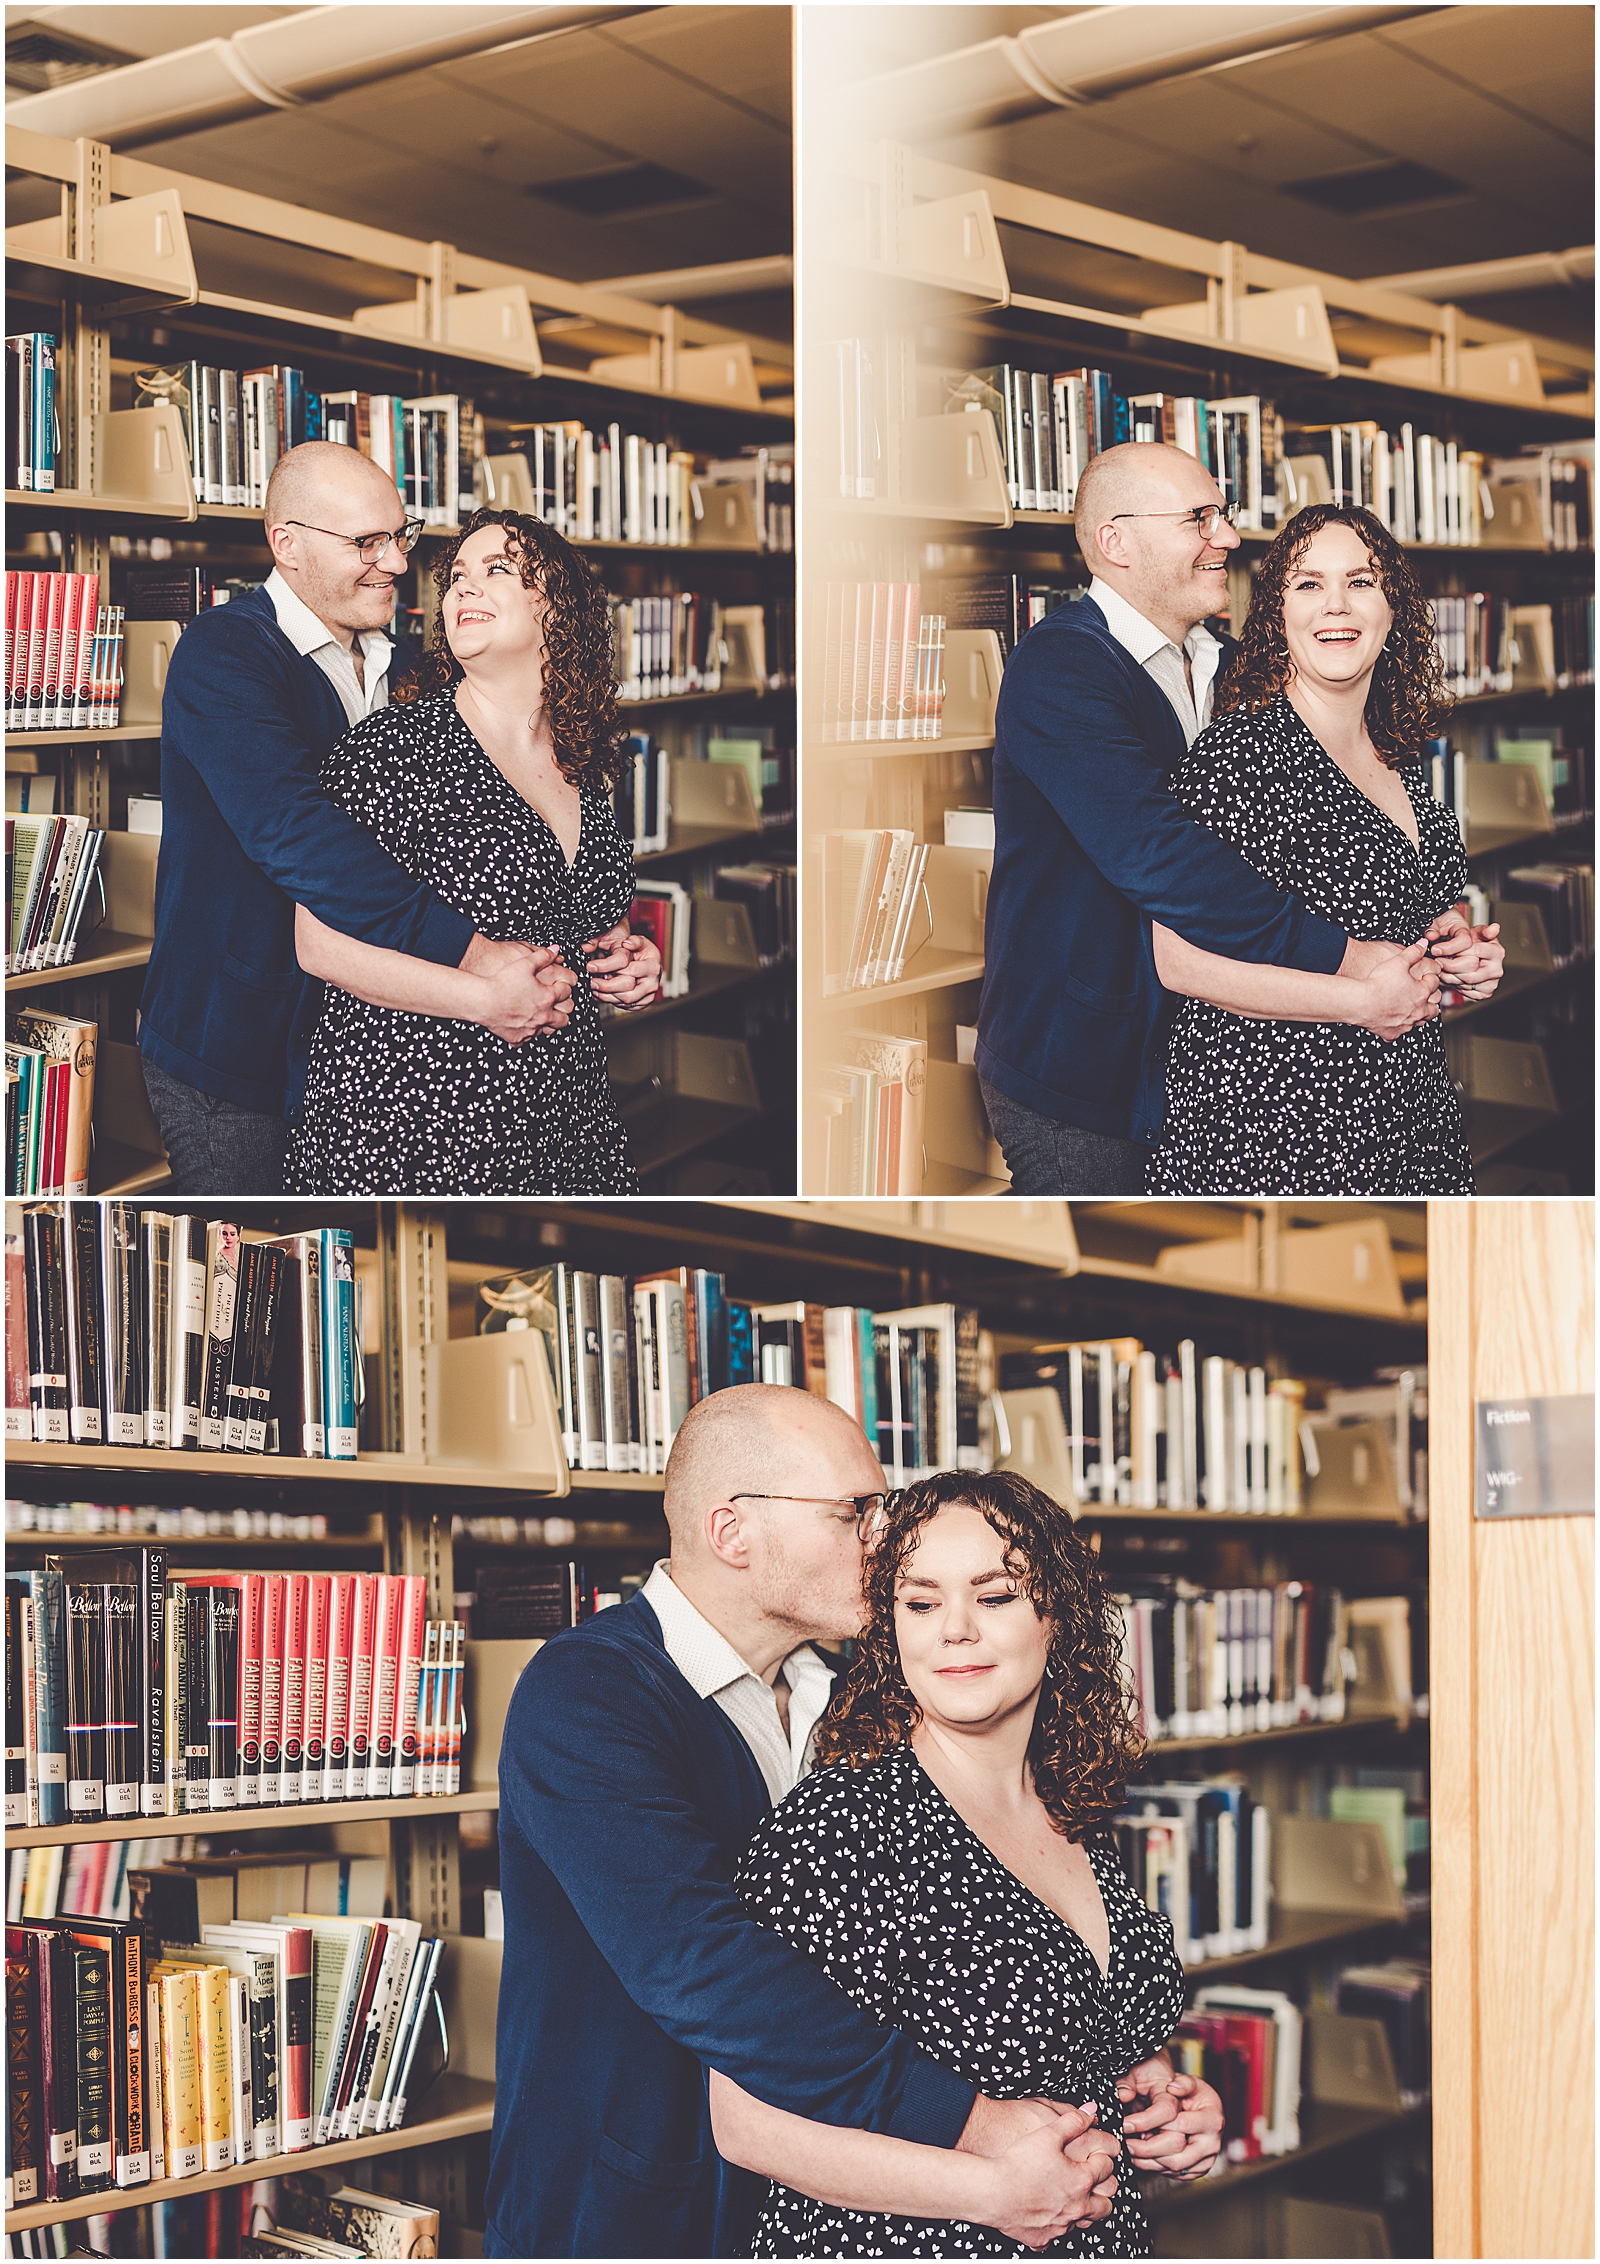 Lizzie & Jake's library engagement session in New Lenox, Illinois with Chicagoland wedding photographer Kara Evans Photographer.